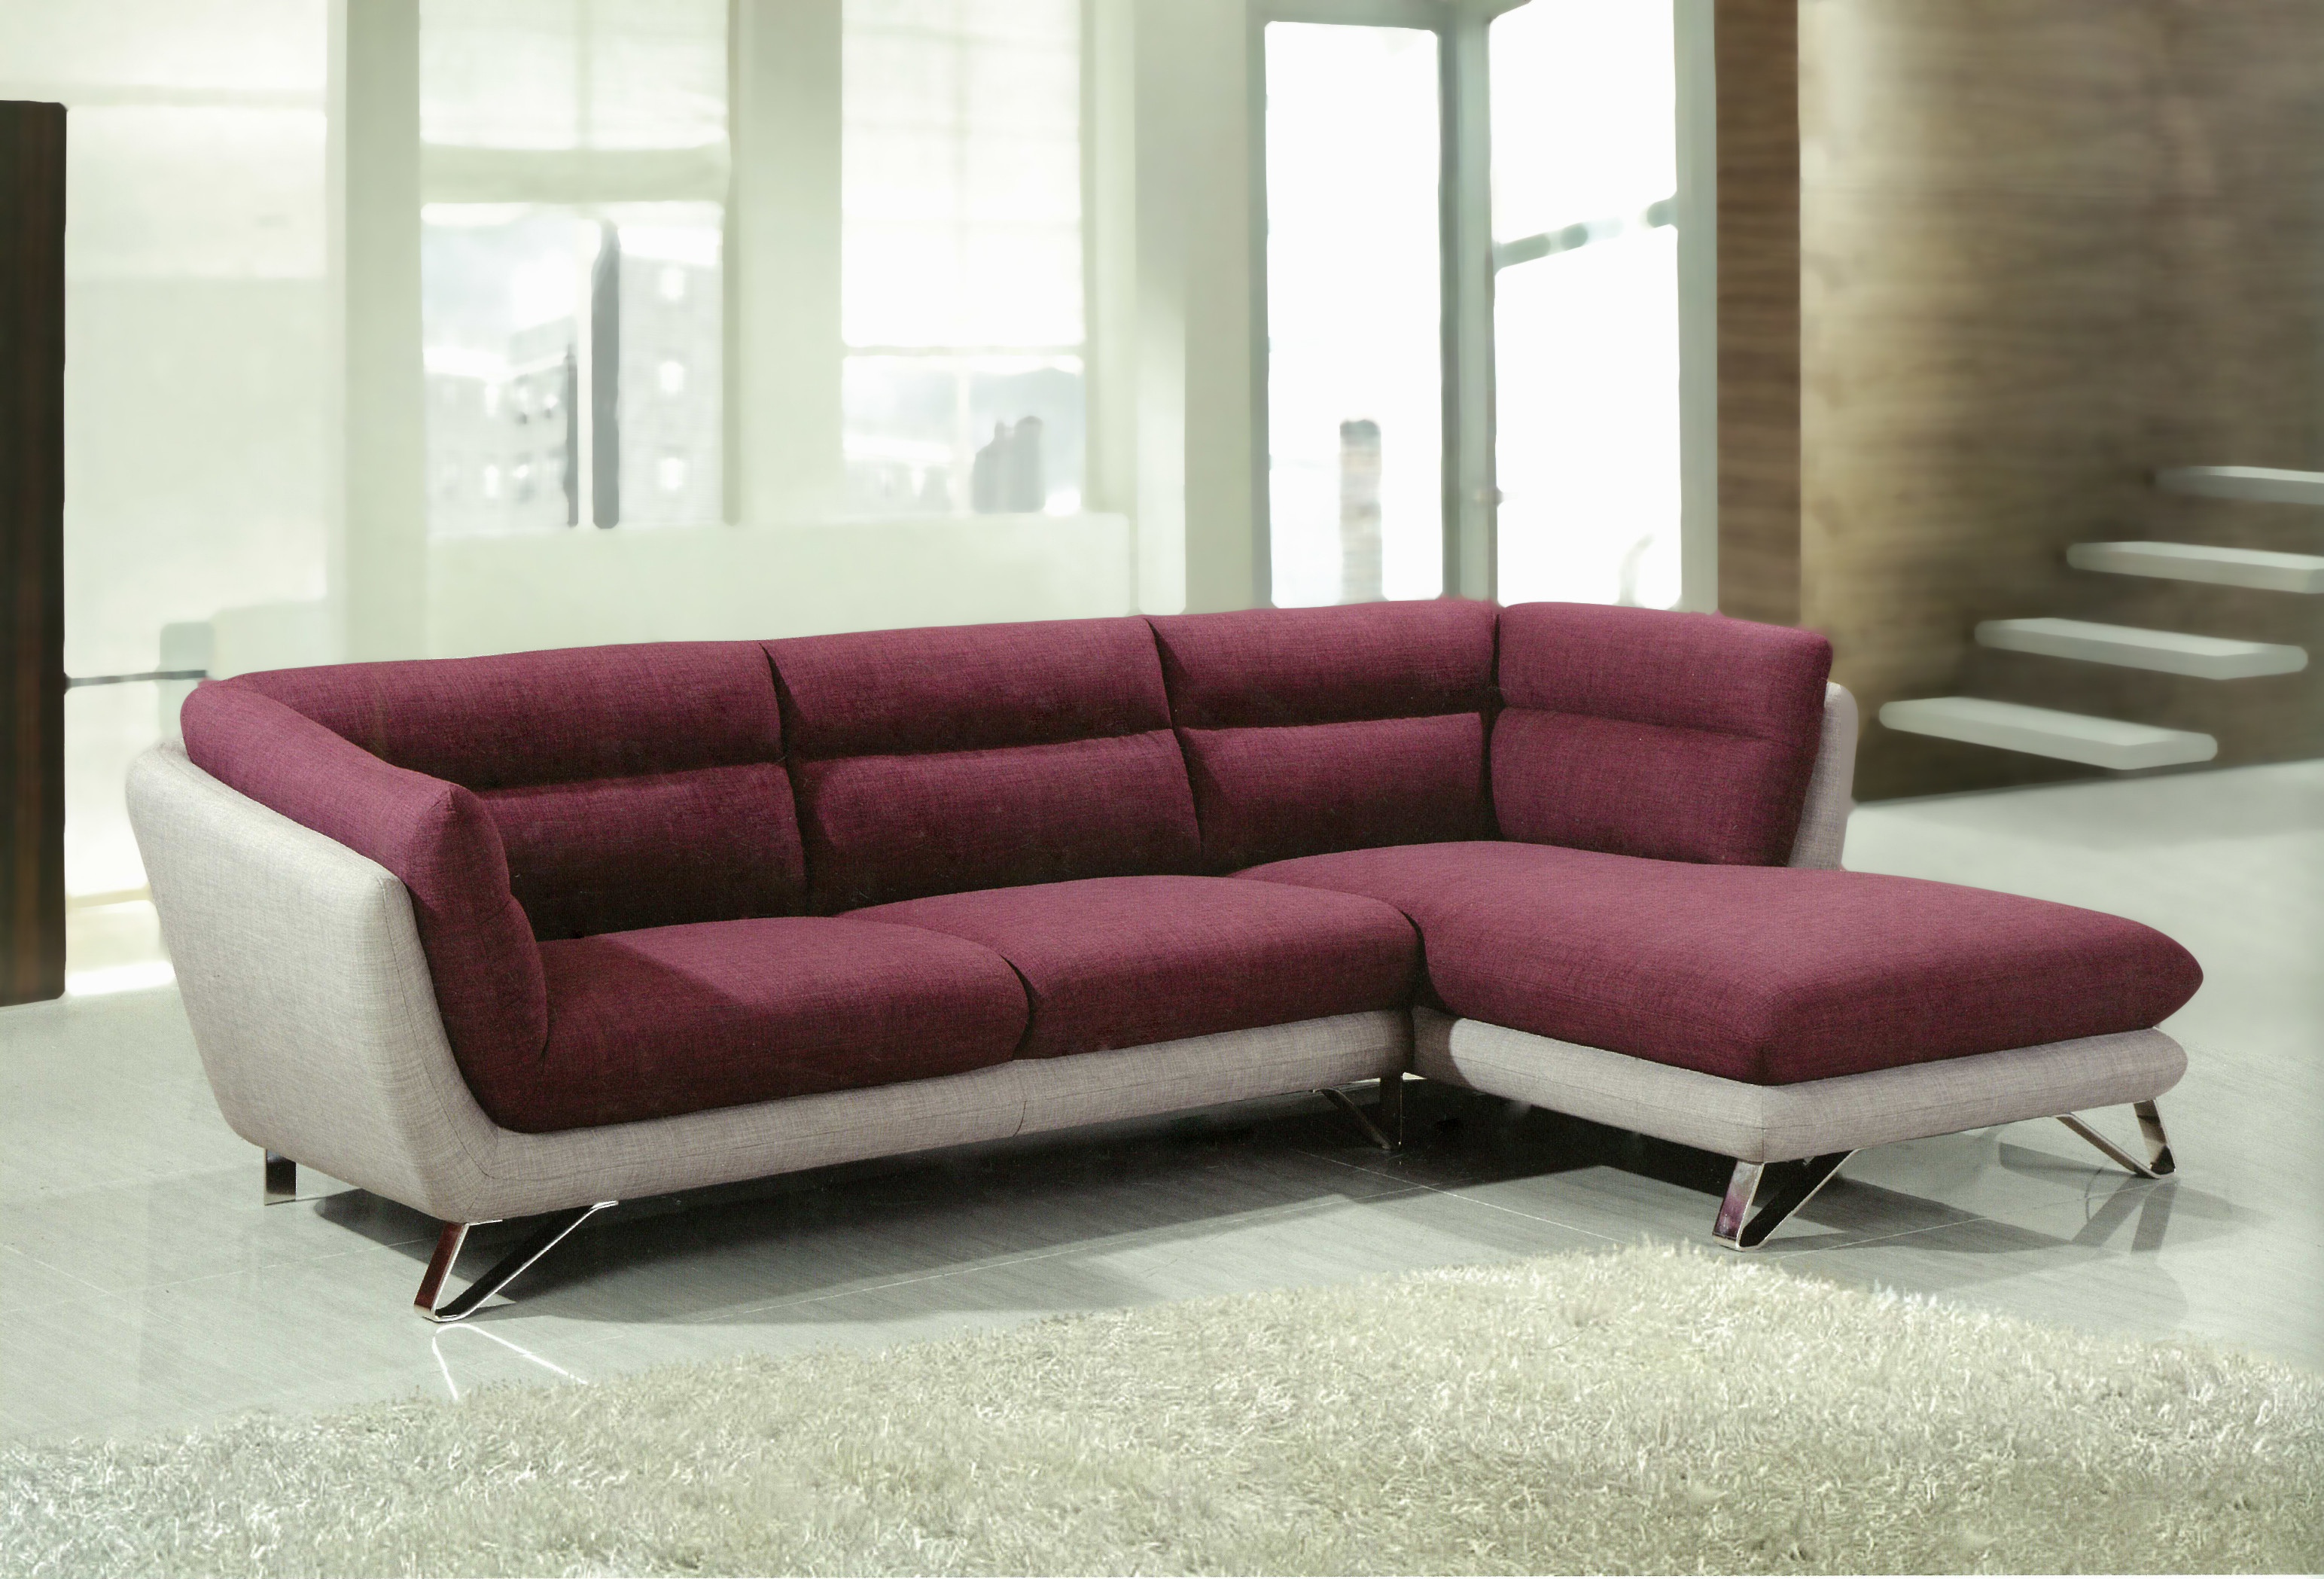 Design Sofa
 10 Modern and Sectional Sofa Designs That Increase Your